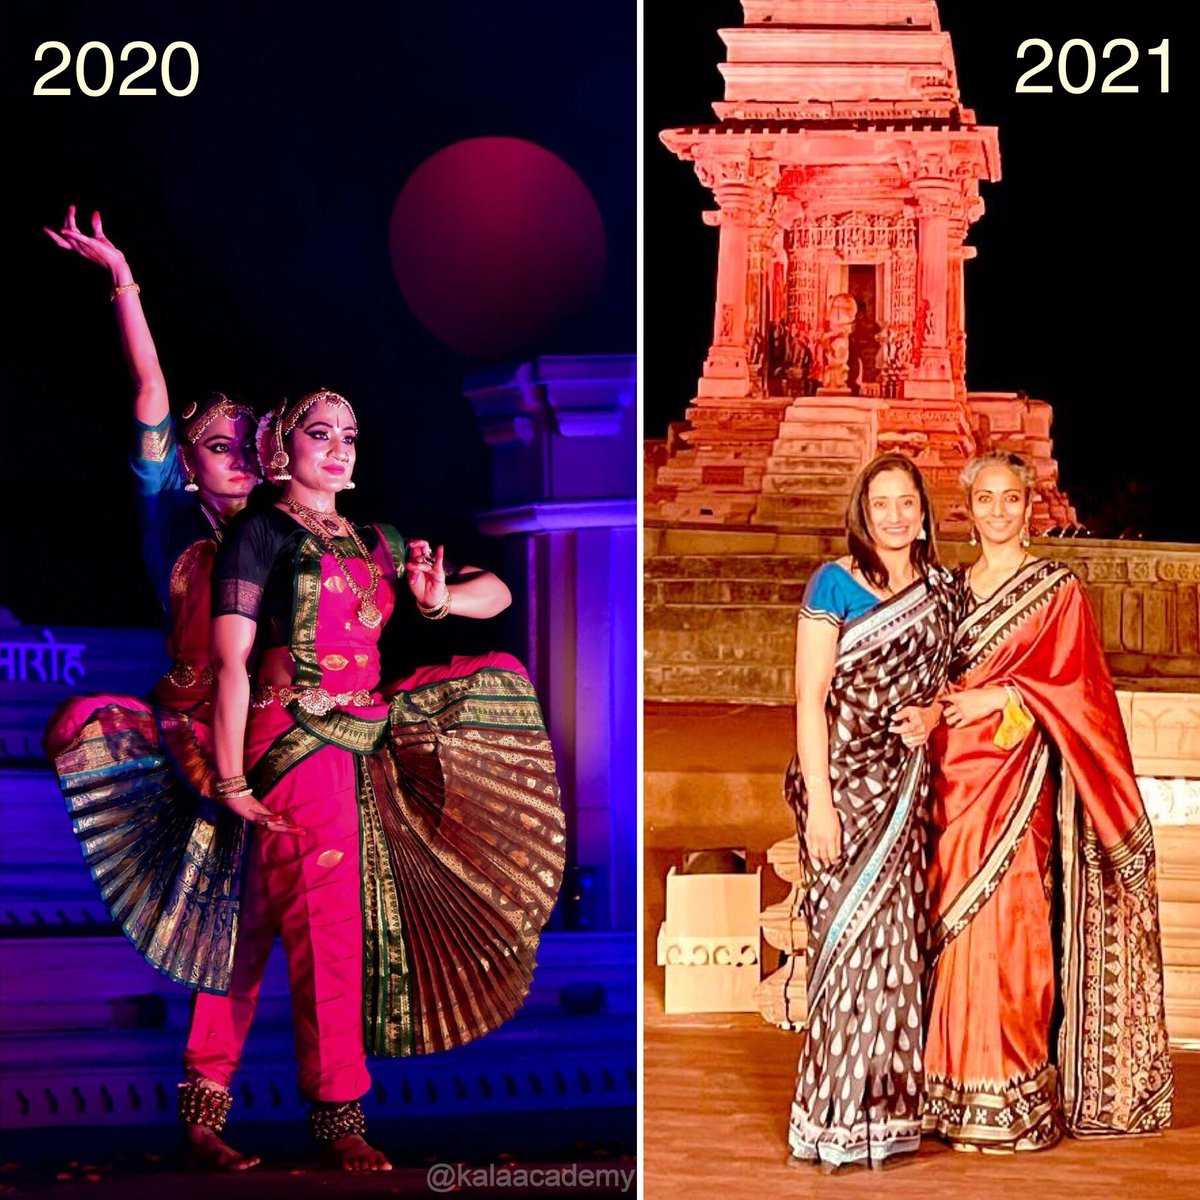 Back in #Khajuraho after a year! This time @bhadrasinha and I relived the magic with the audience under a starlit sky. #KhajurahoDanceFestival is an enthralling experience set against this heritage site! Also discover more of beautiful MP @MPTourism @minculturemp #IncredibleIndia